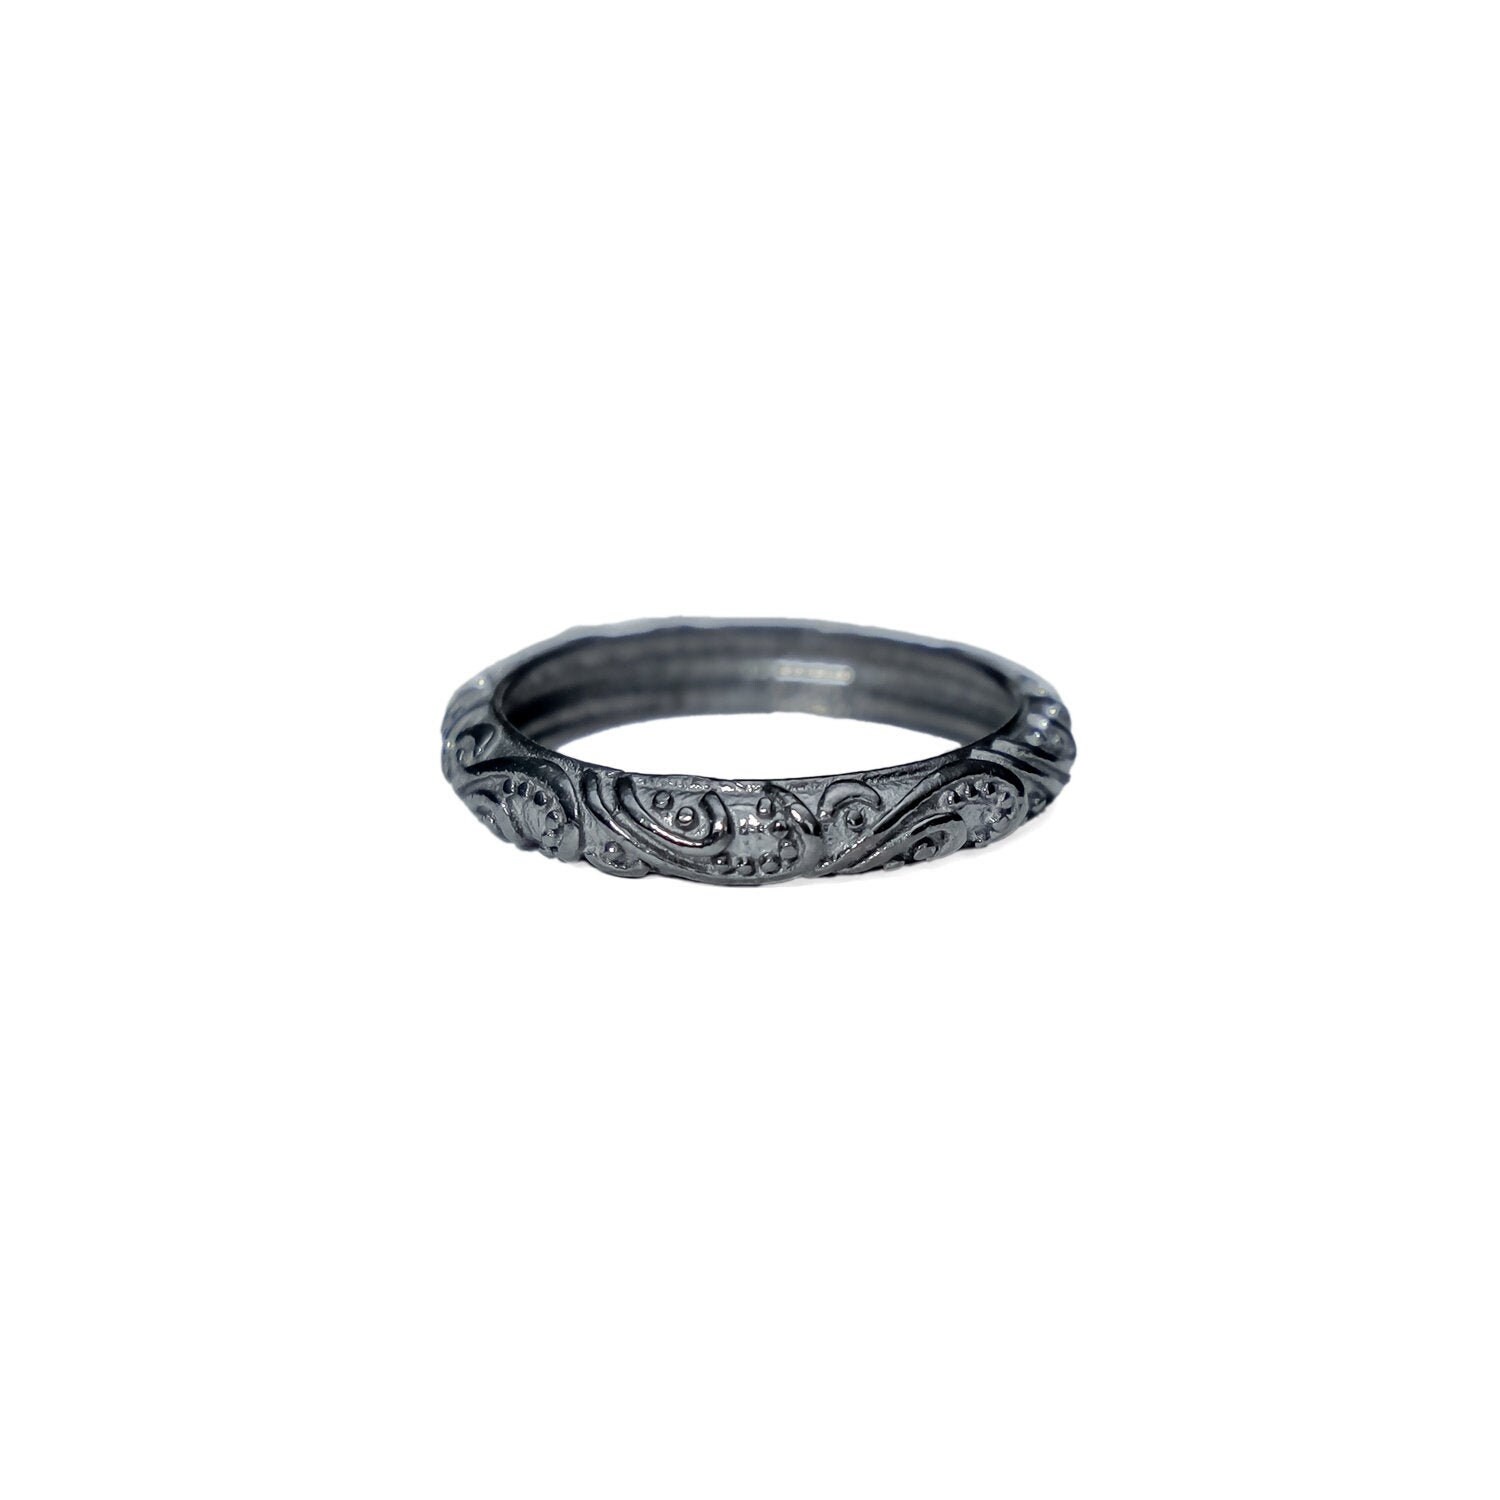 Handmade Antique Silver Ring, Black Rhodium Ring, Bohemian Minimalist 925 Sterling Silver Floral Oxidized Ring